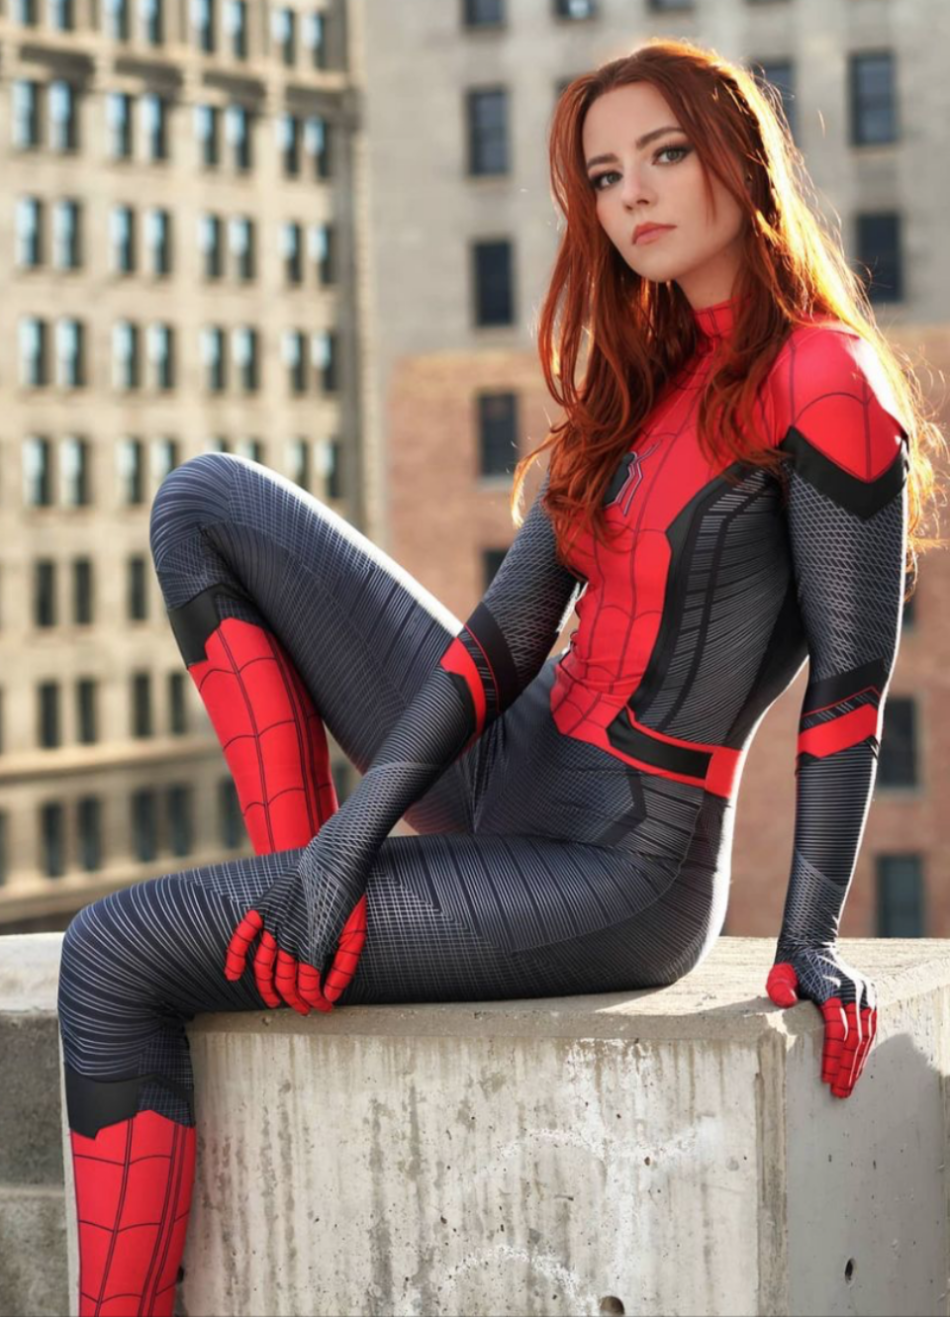 Sexy Red Hot Cosplay Girls Spiderman Women Best Photo Compilation 2021 (89 HQ Photos) 447